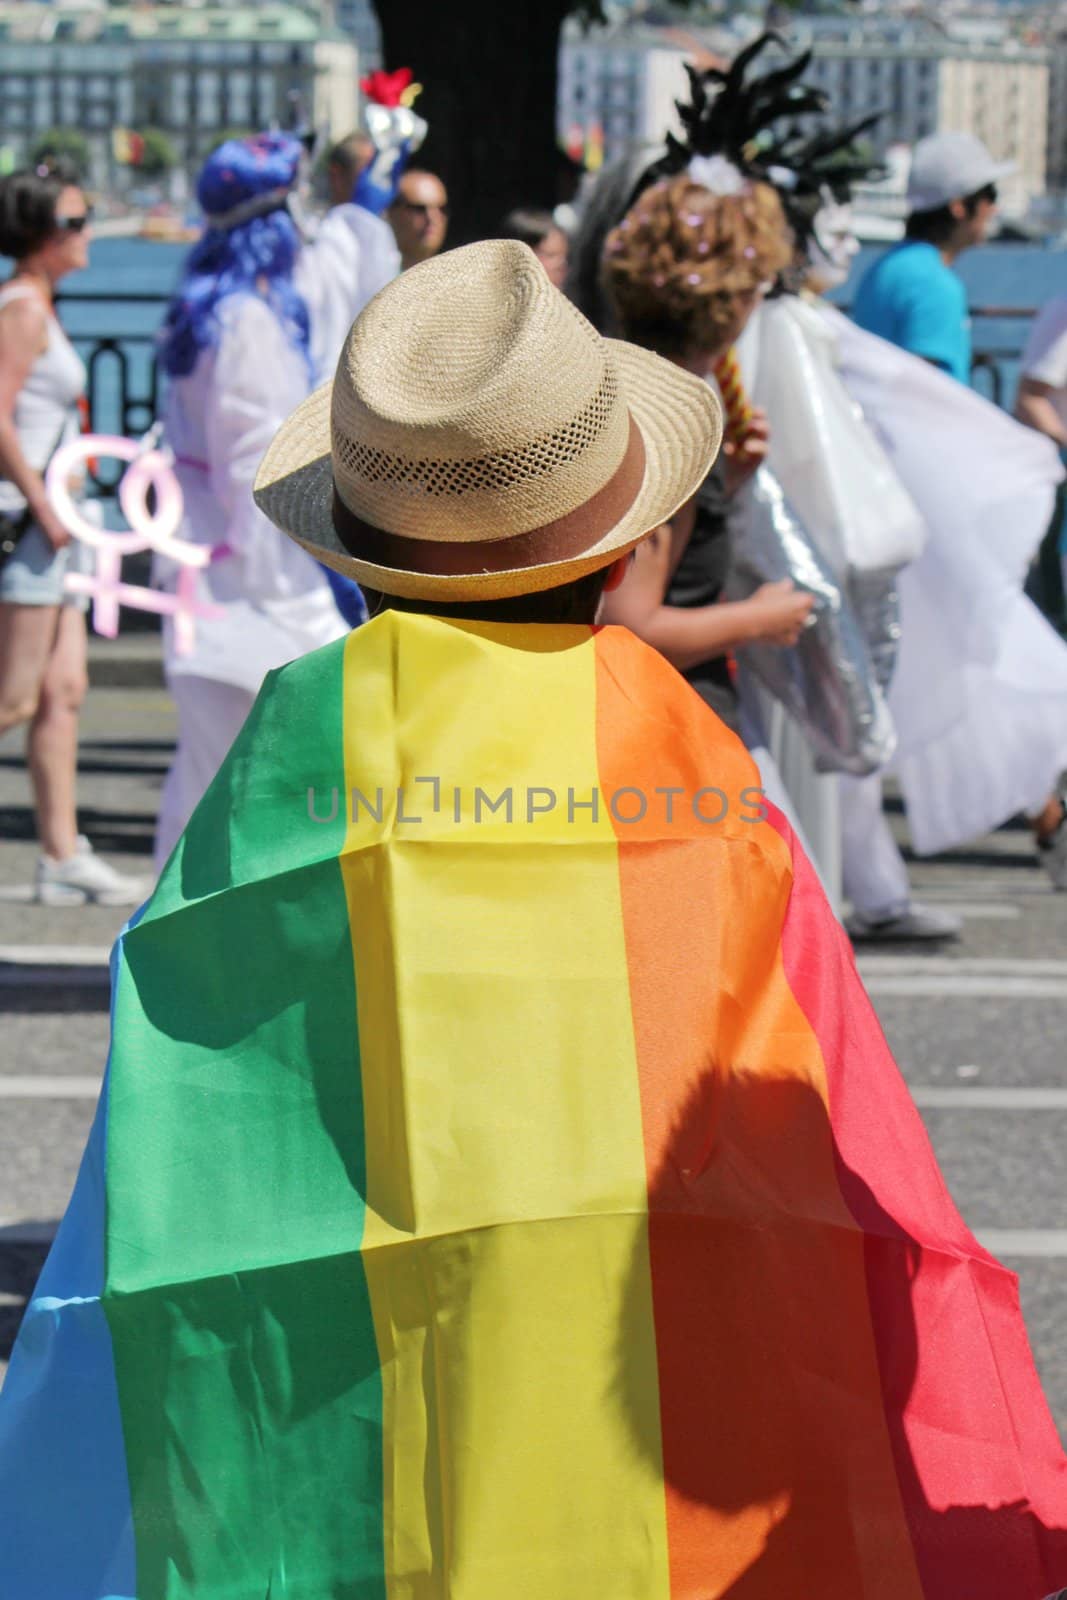 Spectator at the Gaypride by Elenaphotos21